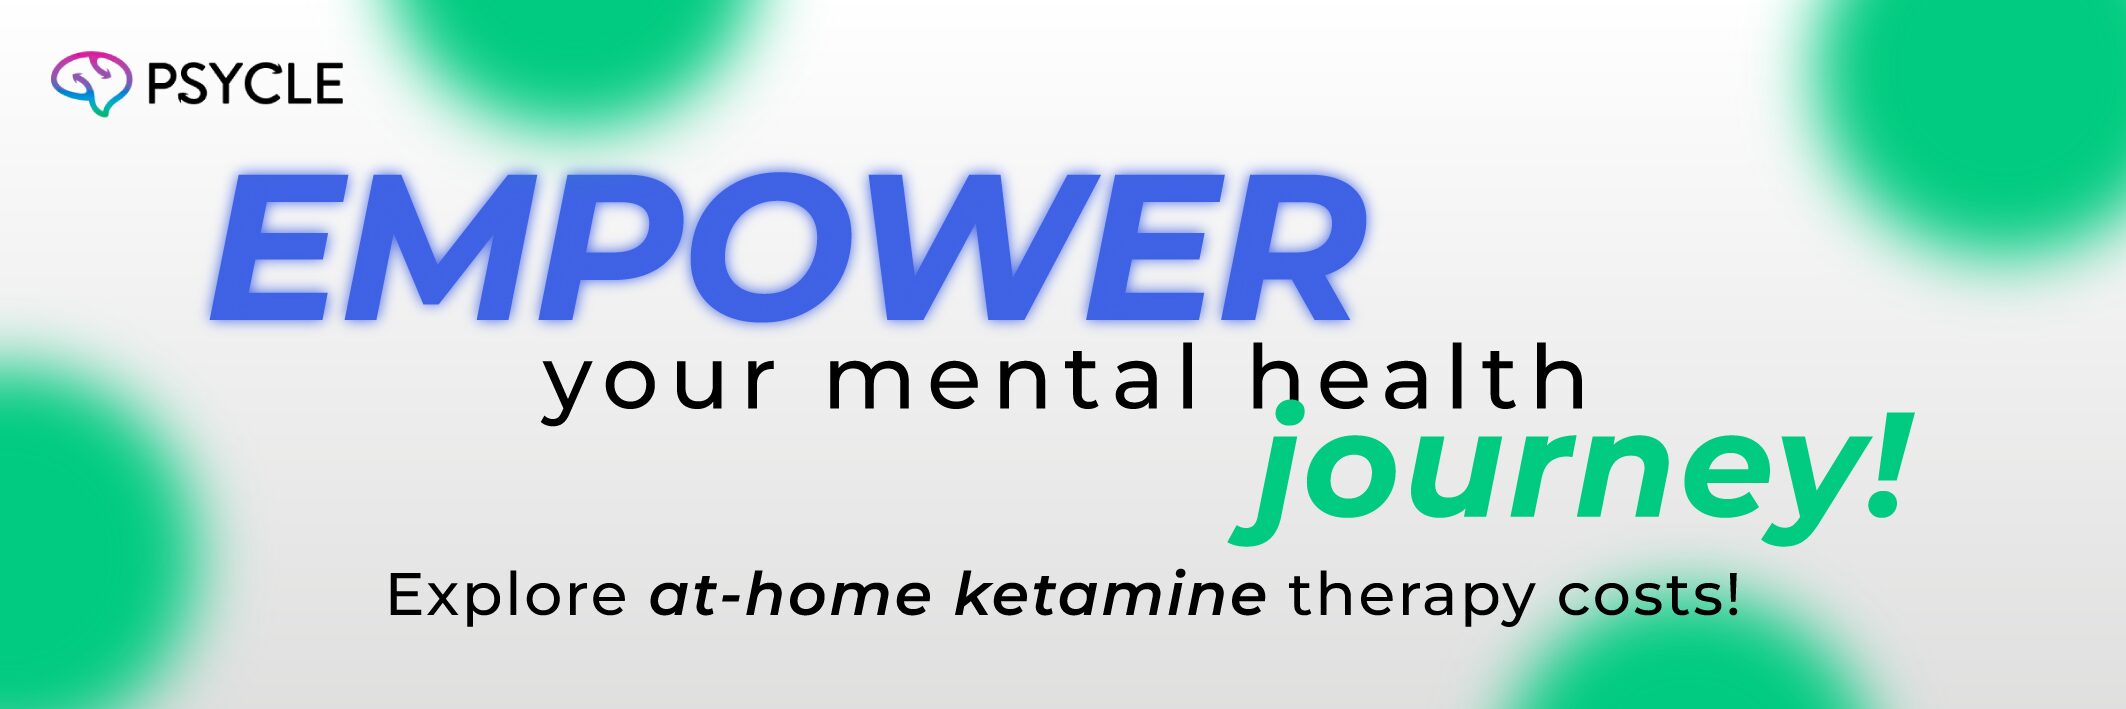 Banner that reads "Empower your mental health journey! Expora at-home ketamine therapy costs.